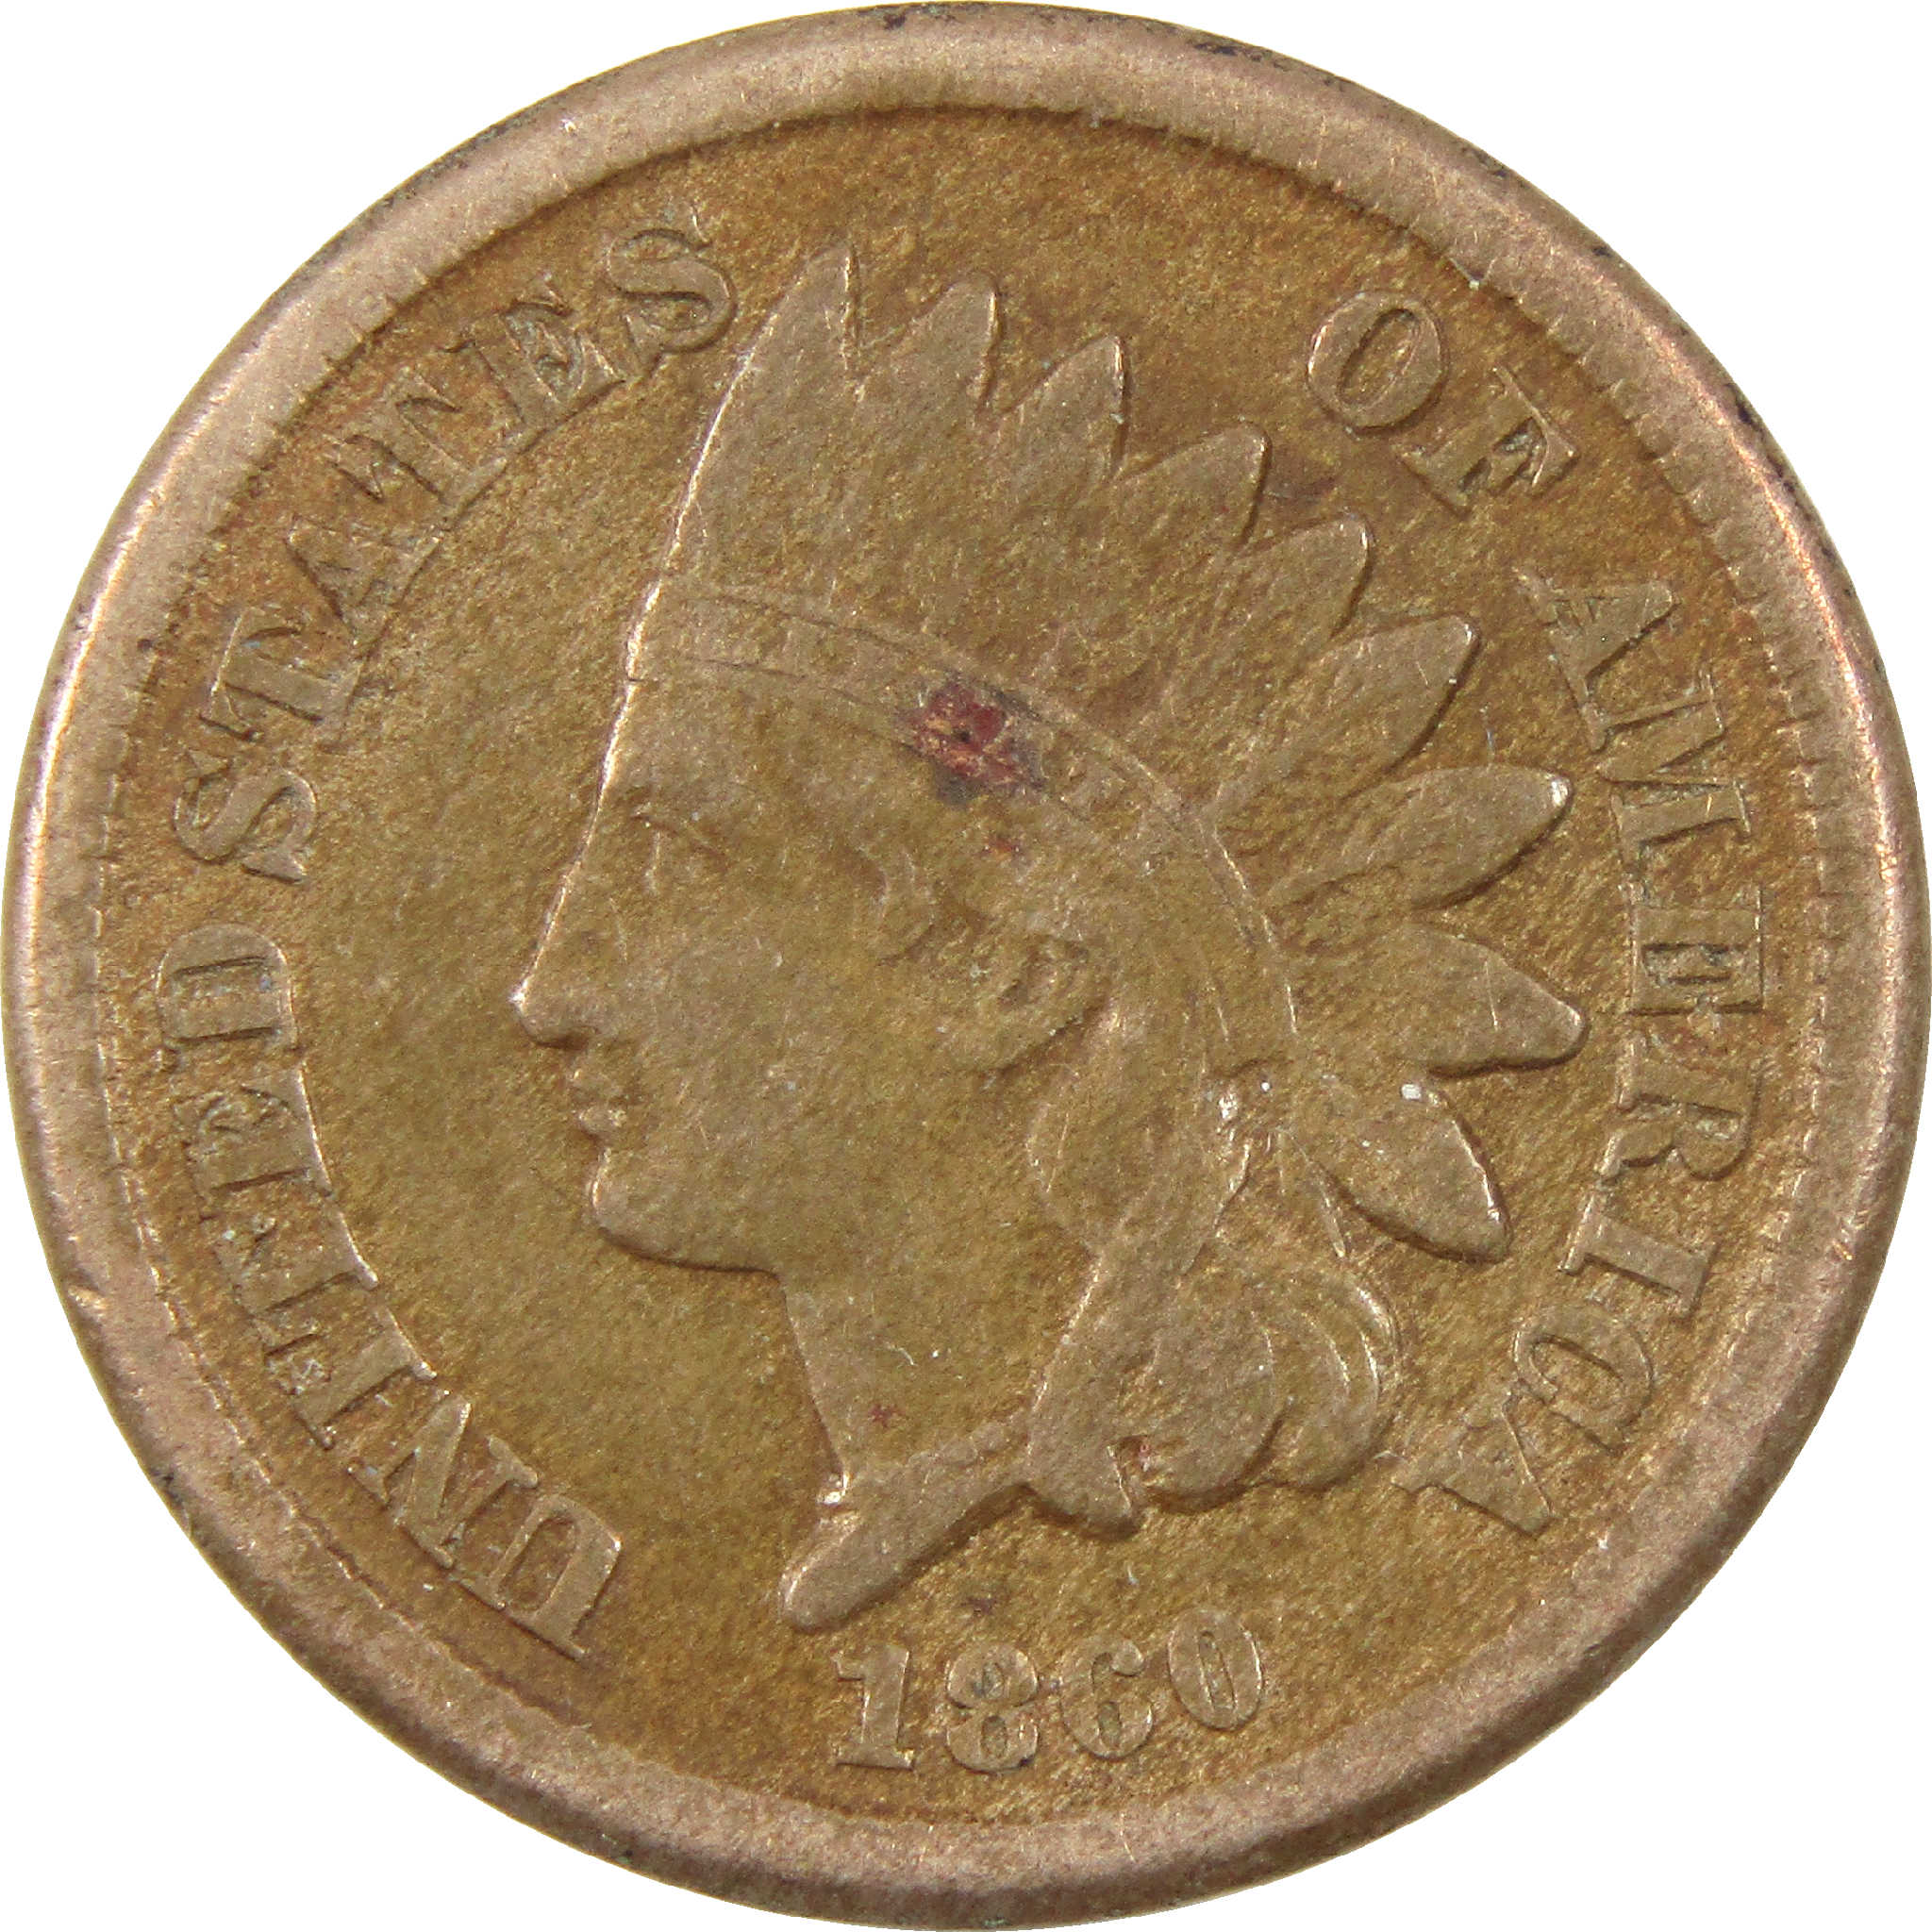 1860 Indian Head Cent VF Copper-Nickel Penny 1c Coin SKU:I11477